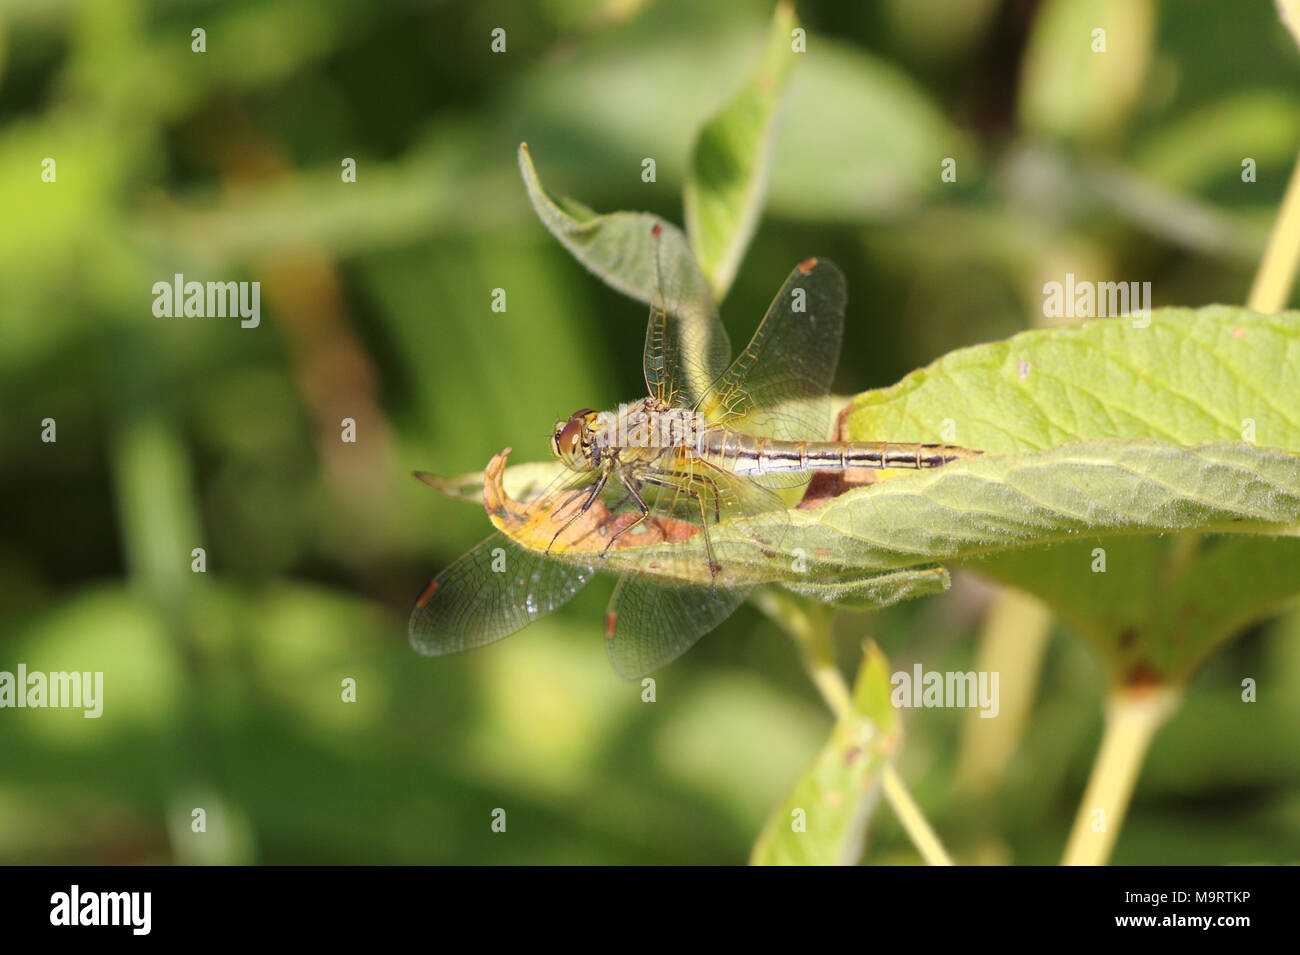 Brown dragonfly (Aeschna grandis) sitting on a green leaf, close-up, selective focus Stock Photo